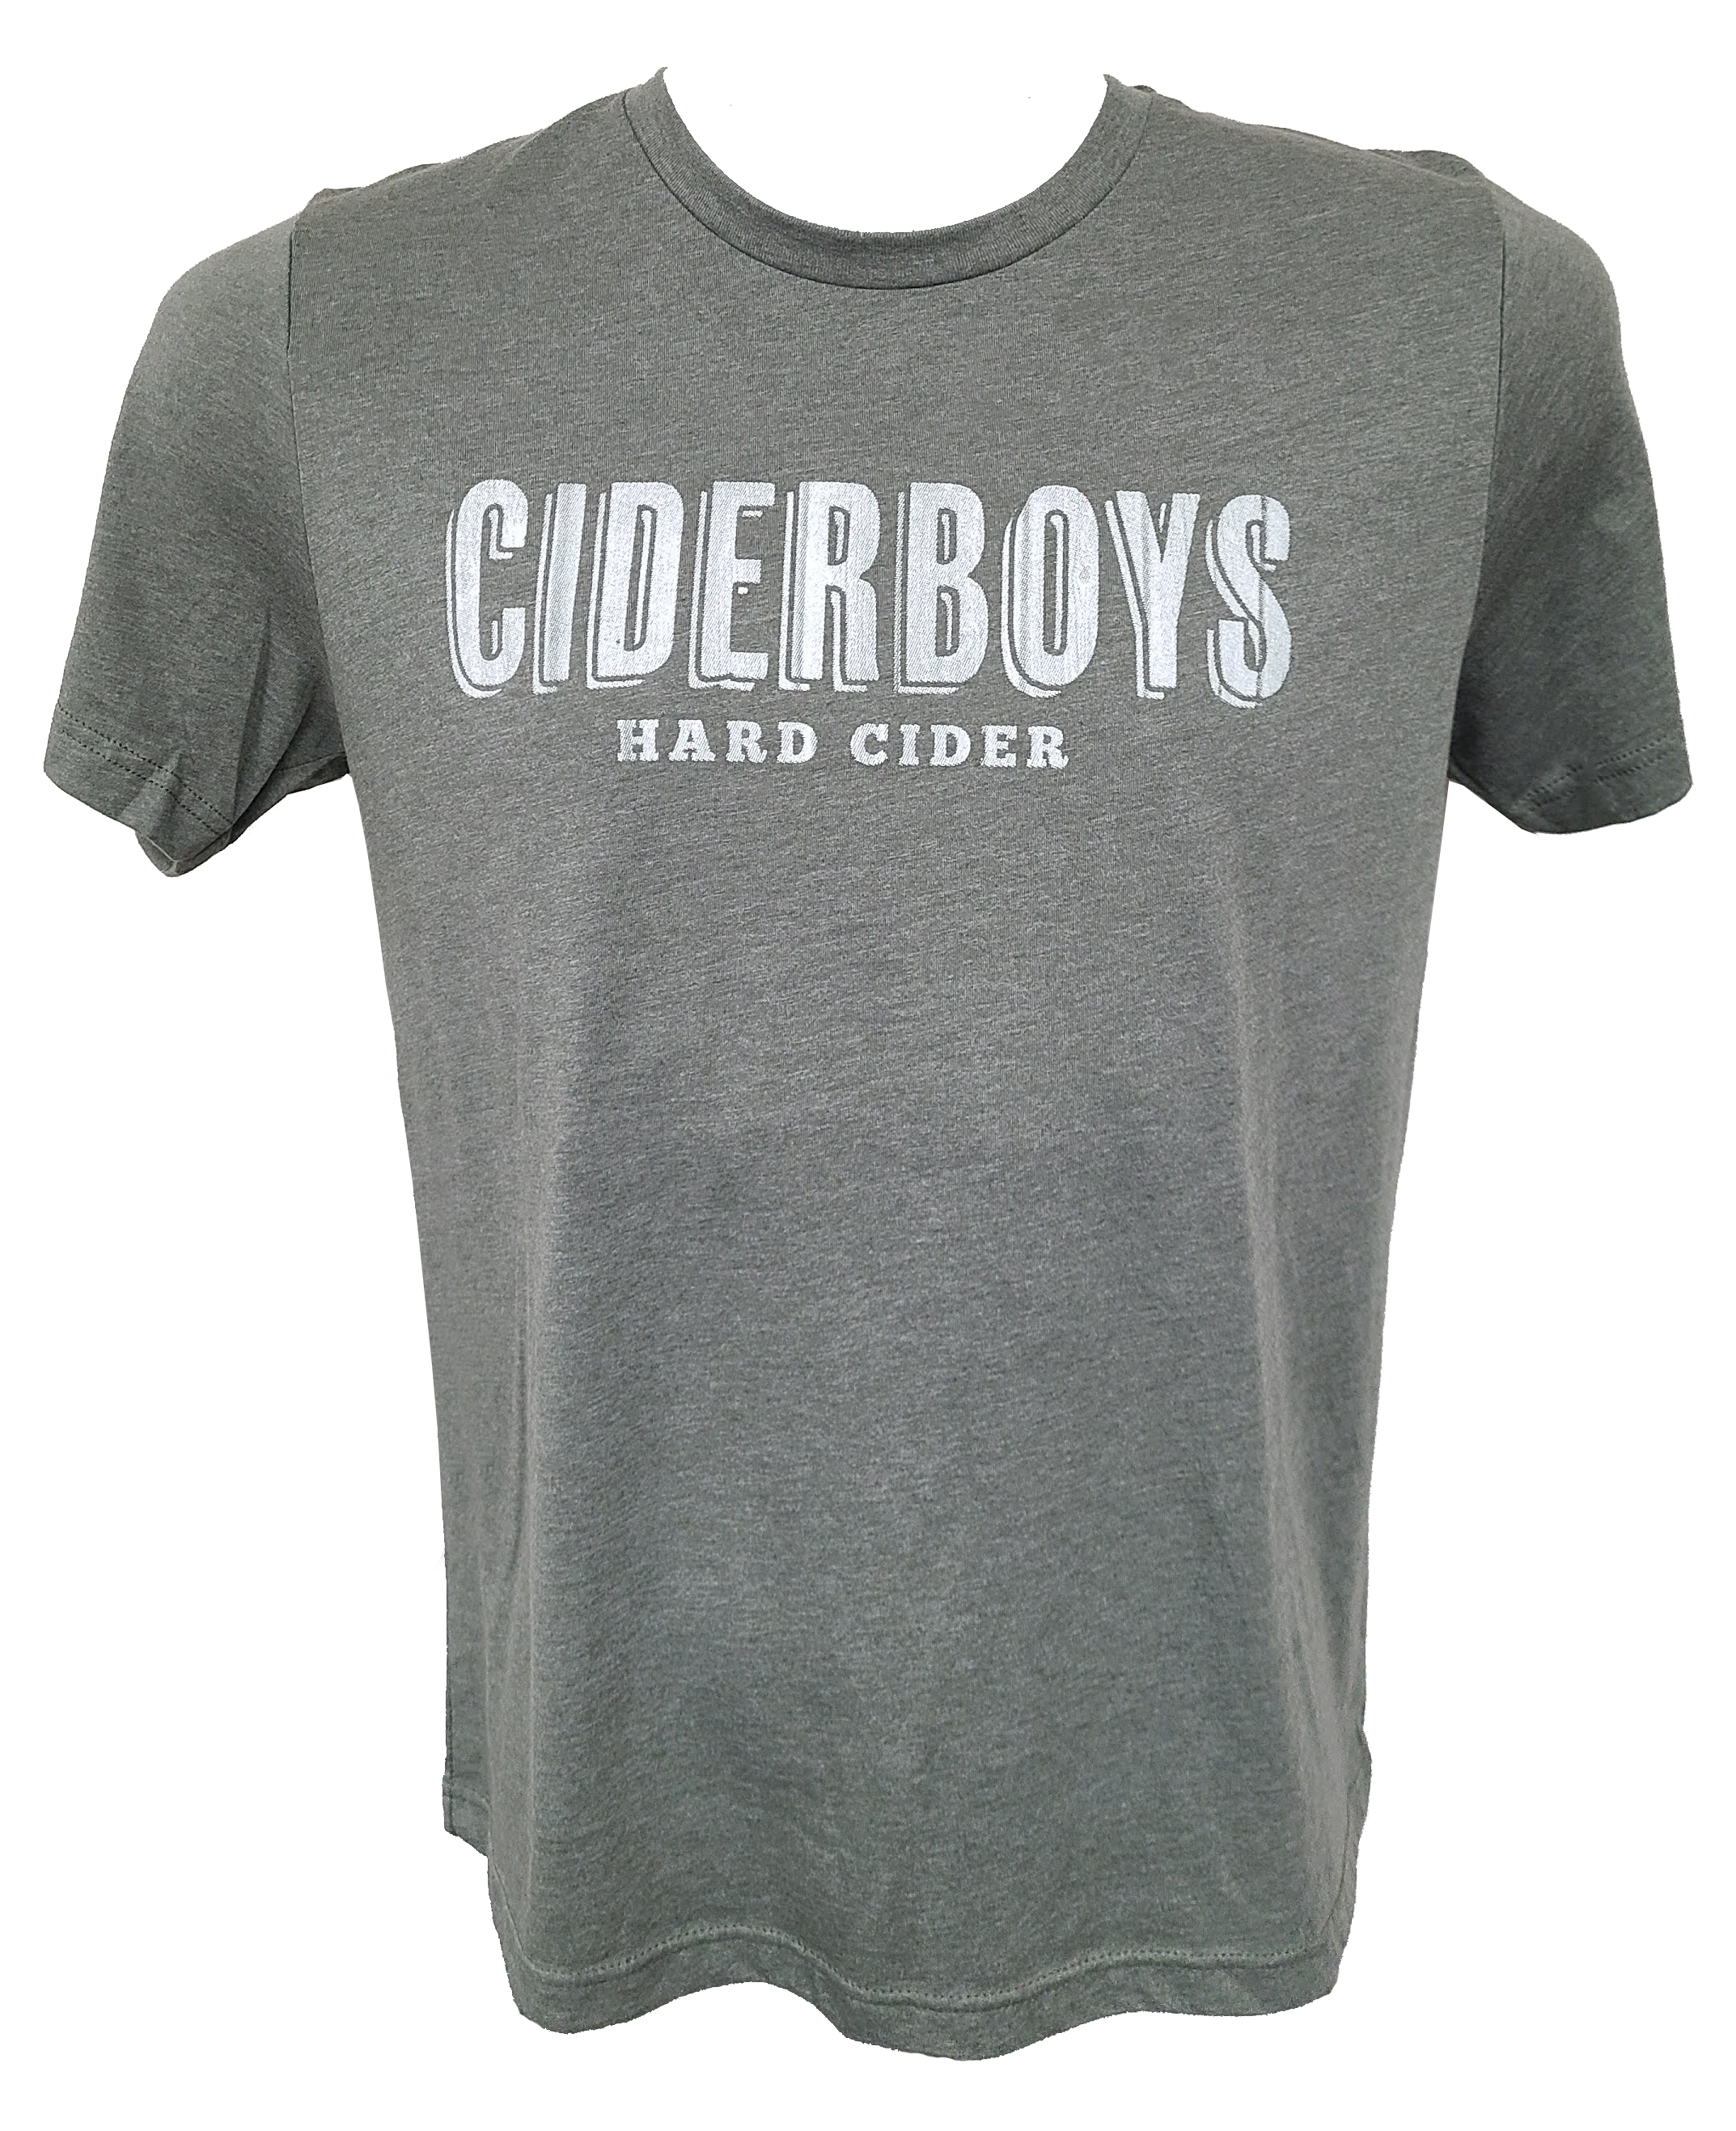 Ciderboys Green Tee Featured Product Image